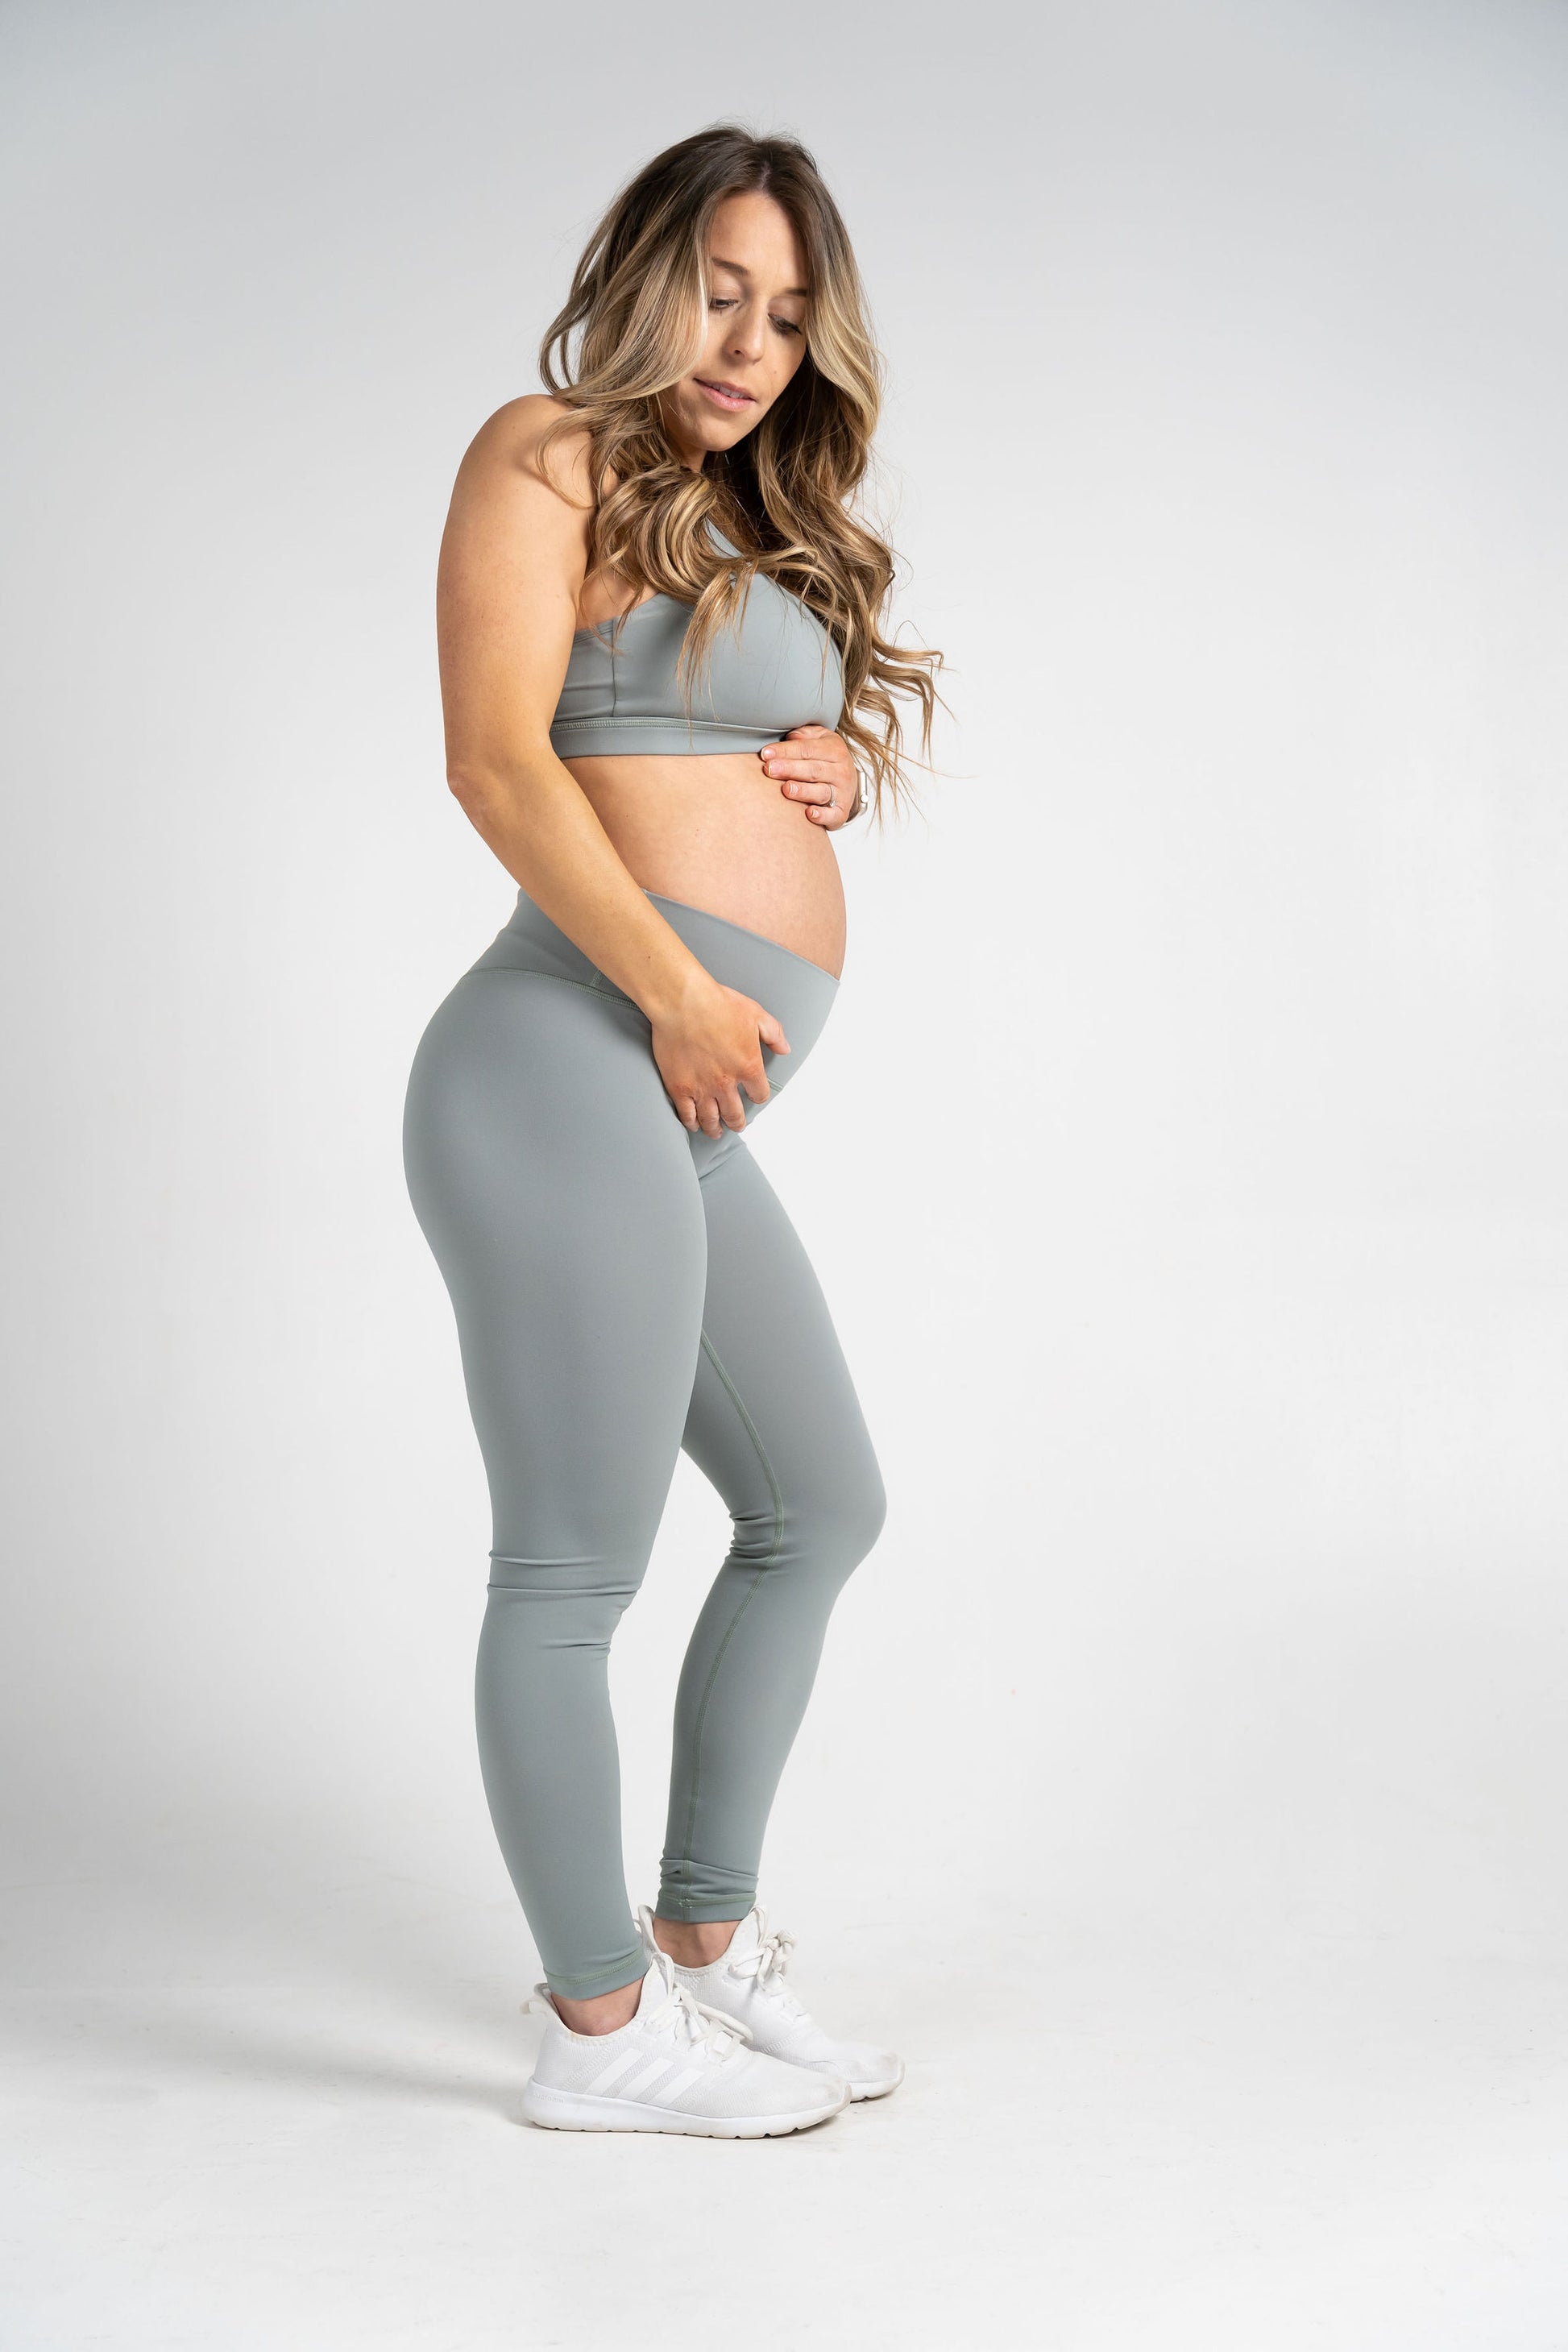 Lady Ivy Leggings from Lady Luxe Athliesure! Shop today www